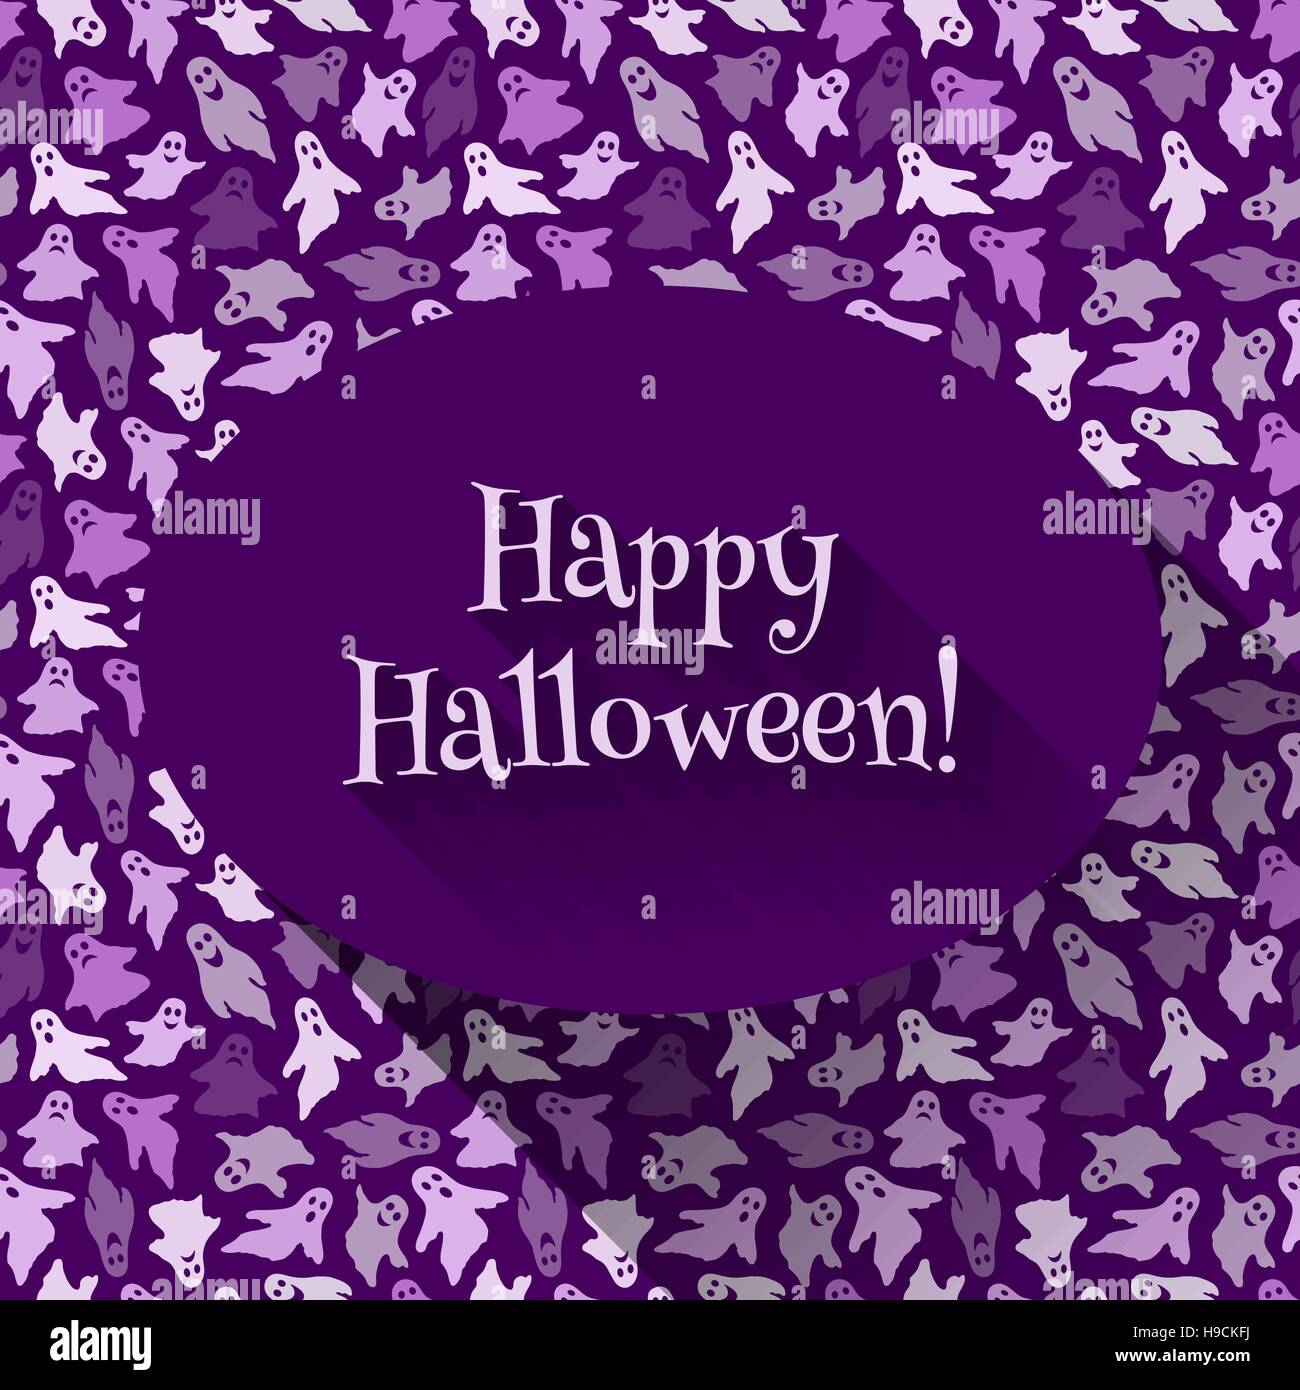 'Happy Halloween!' greeting over a seamless pattern with ghosts, eps10. Monochromatic background with traditional Halloween elements. Stock Vector